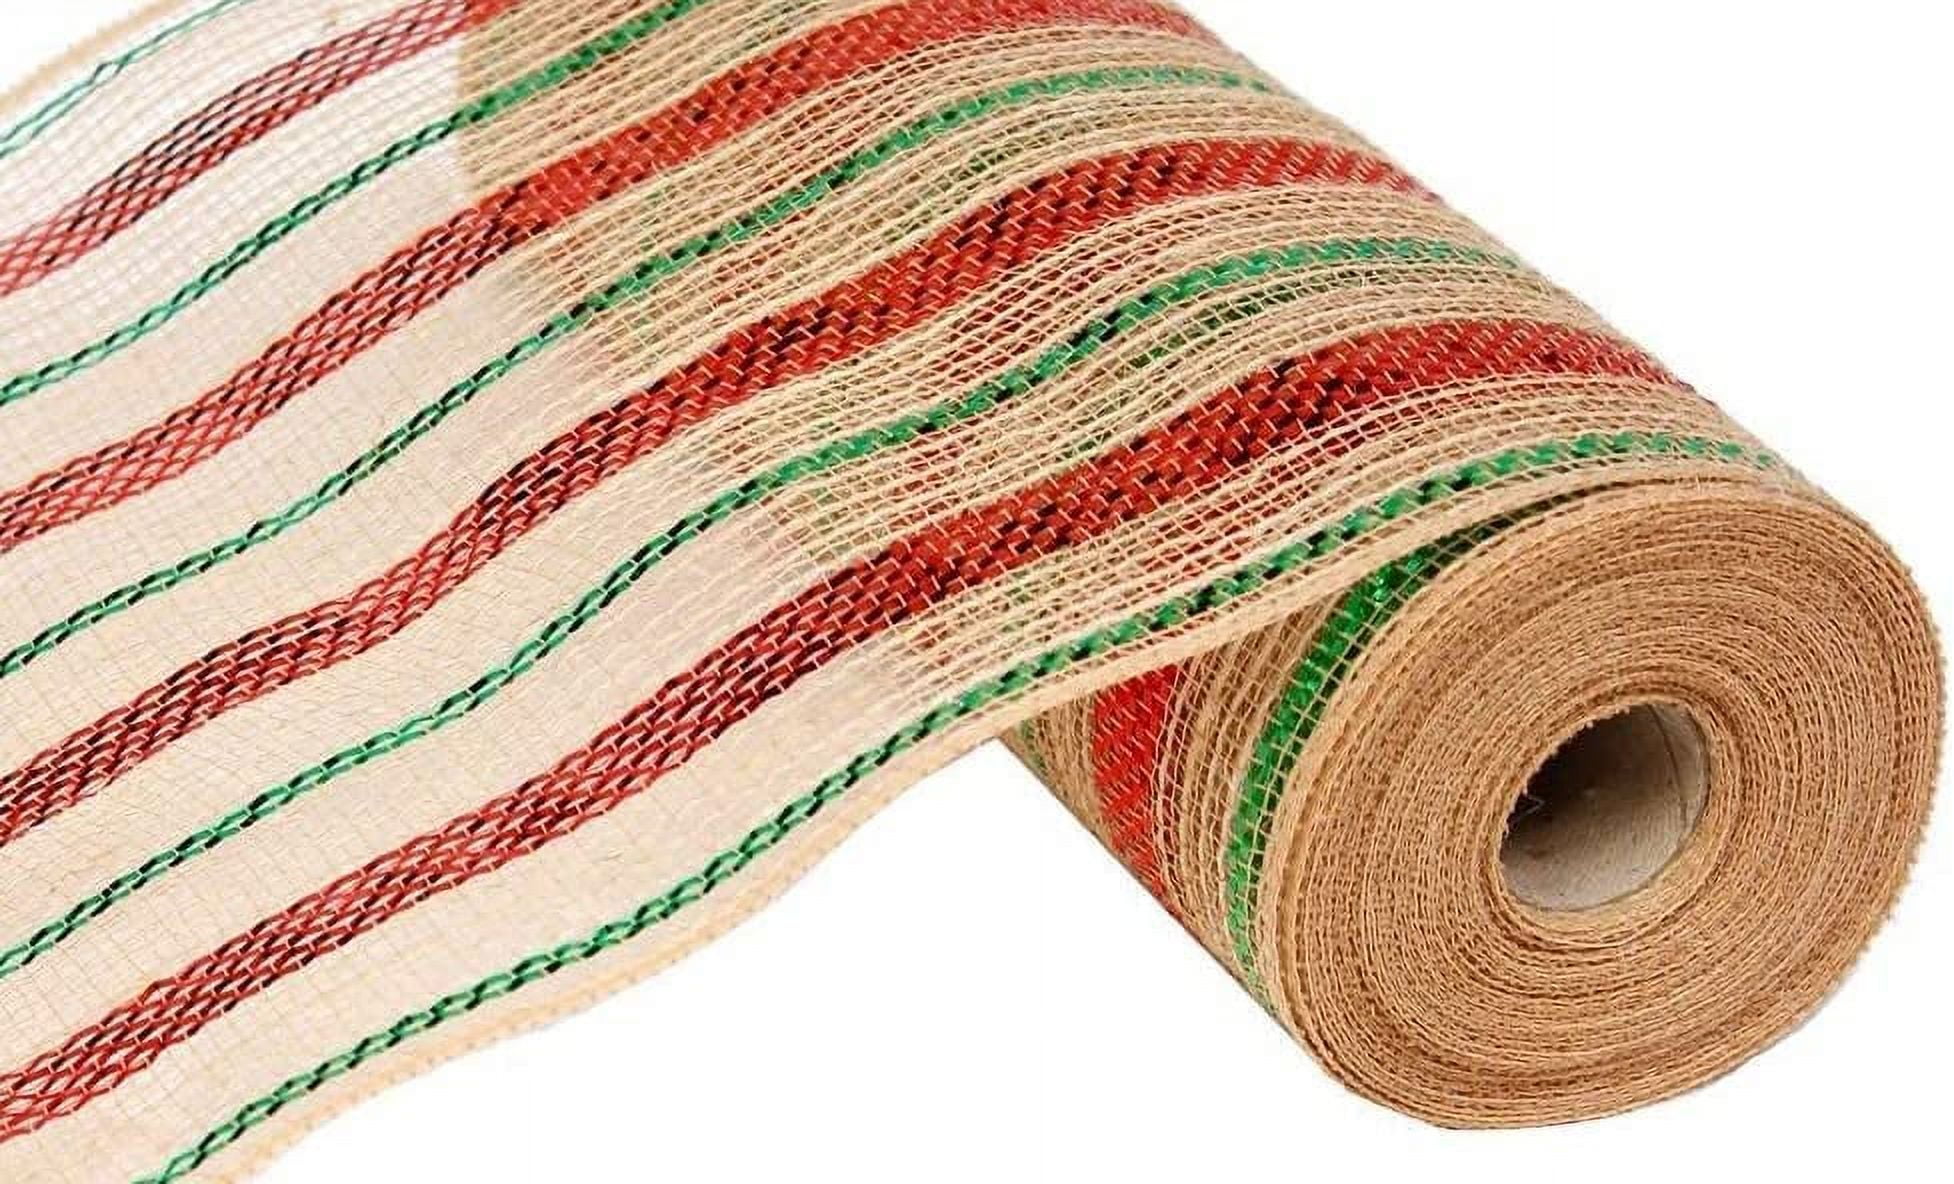 4 Rolls Poly Burlap Deco Mesh 10 Inch Wide Decorative Ribbon Wrapping Home  Door Wreath Decoration DIY Crafts Making 